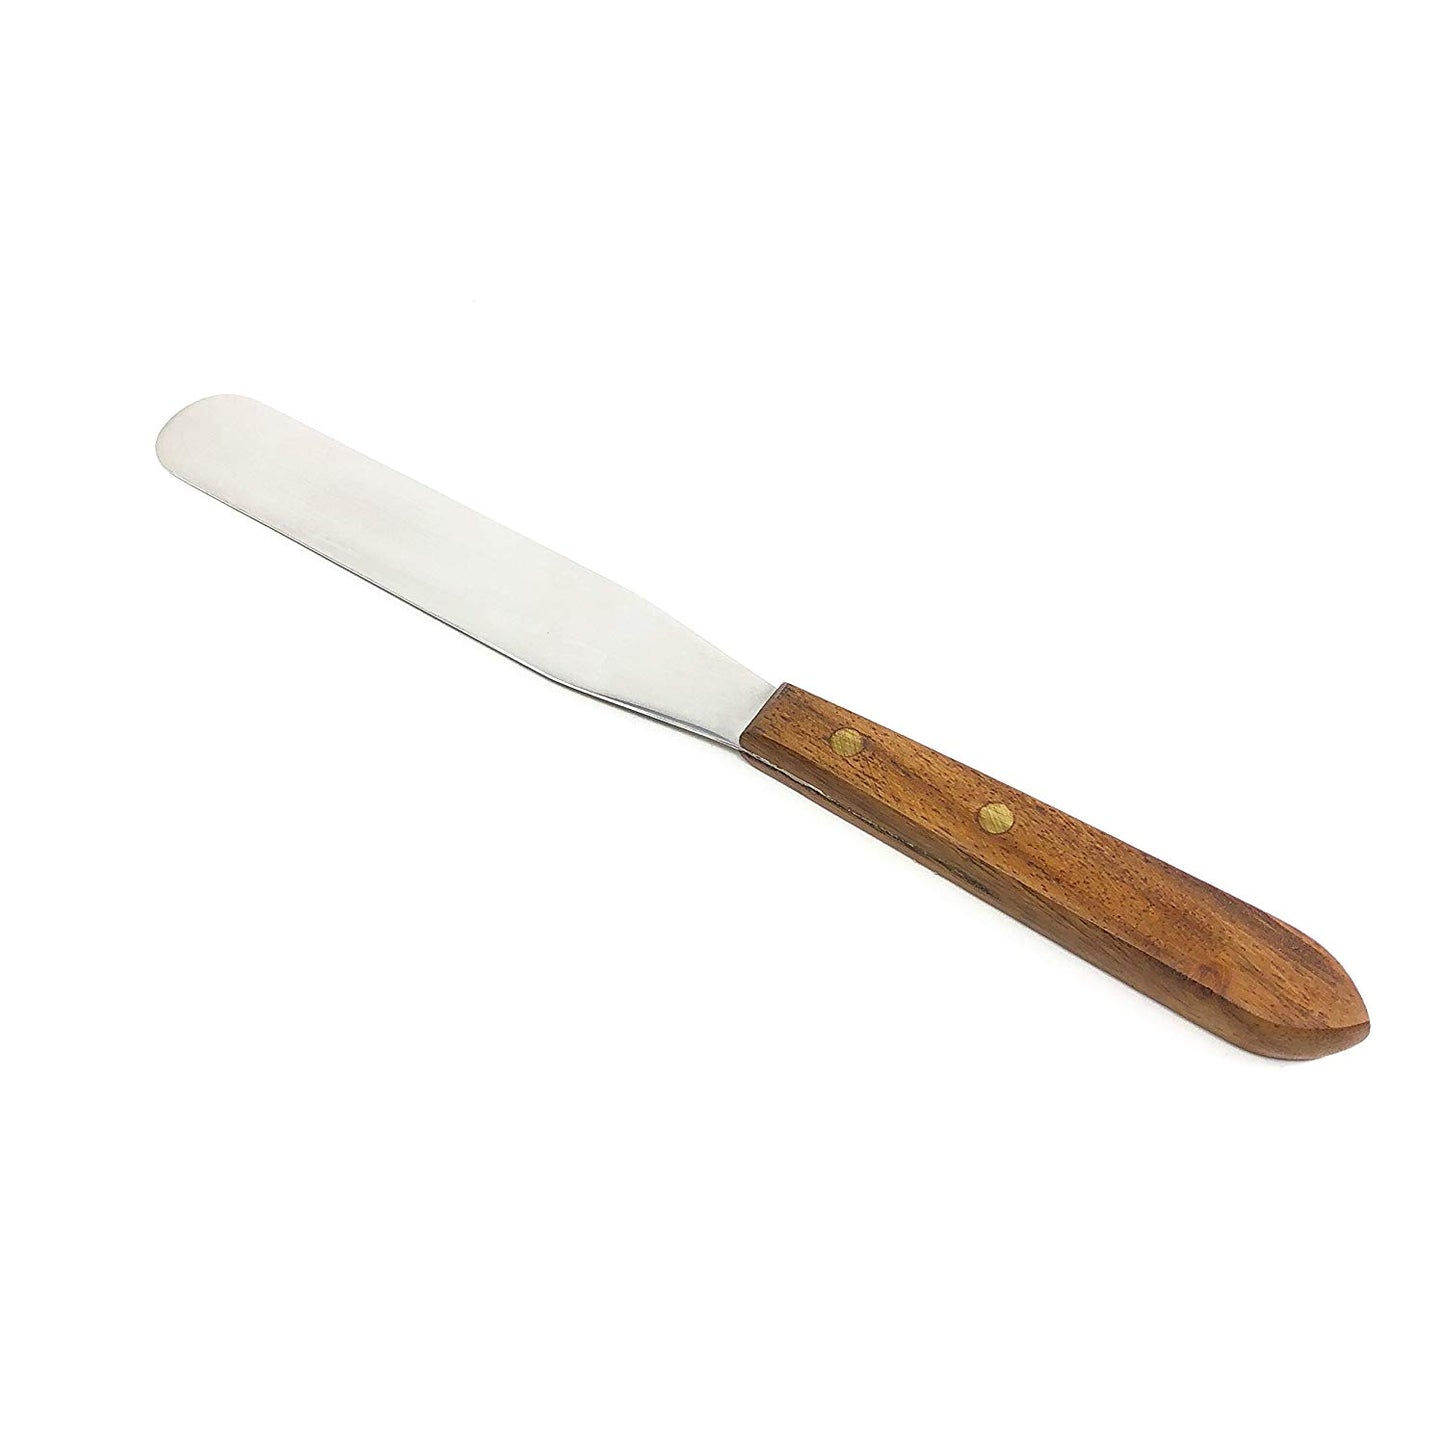 IMS-WHSPT10 Lab Spatula Wooden Handle, 10" Stainless Steel Blade, Brass Rivets